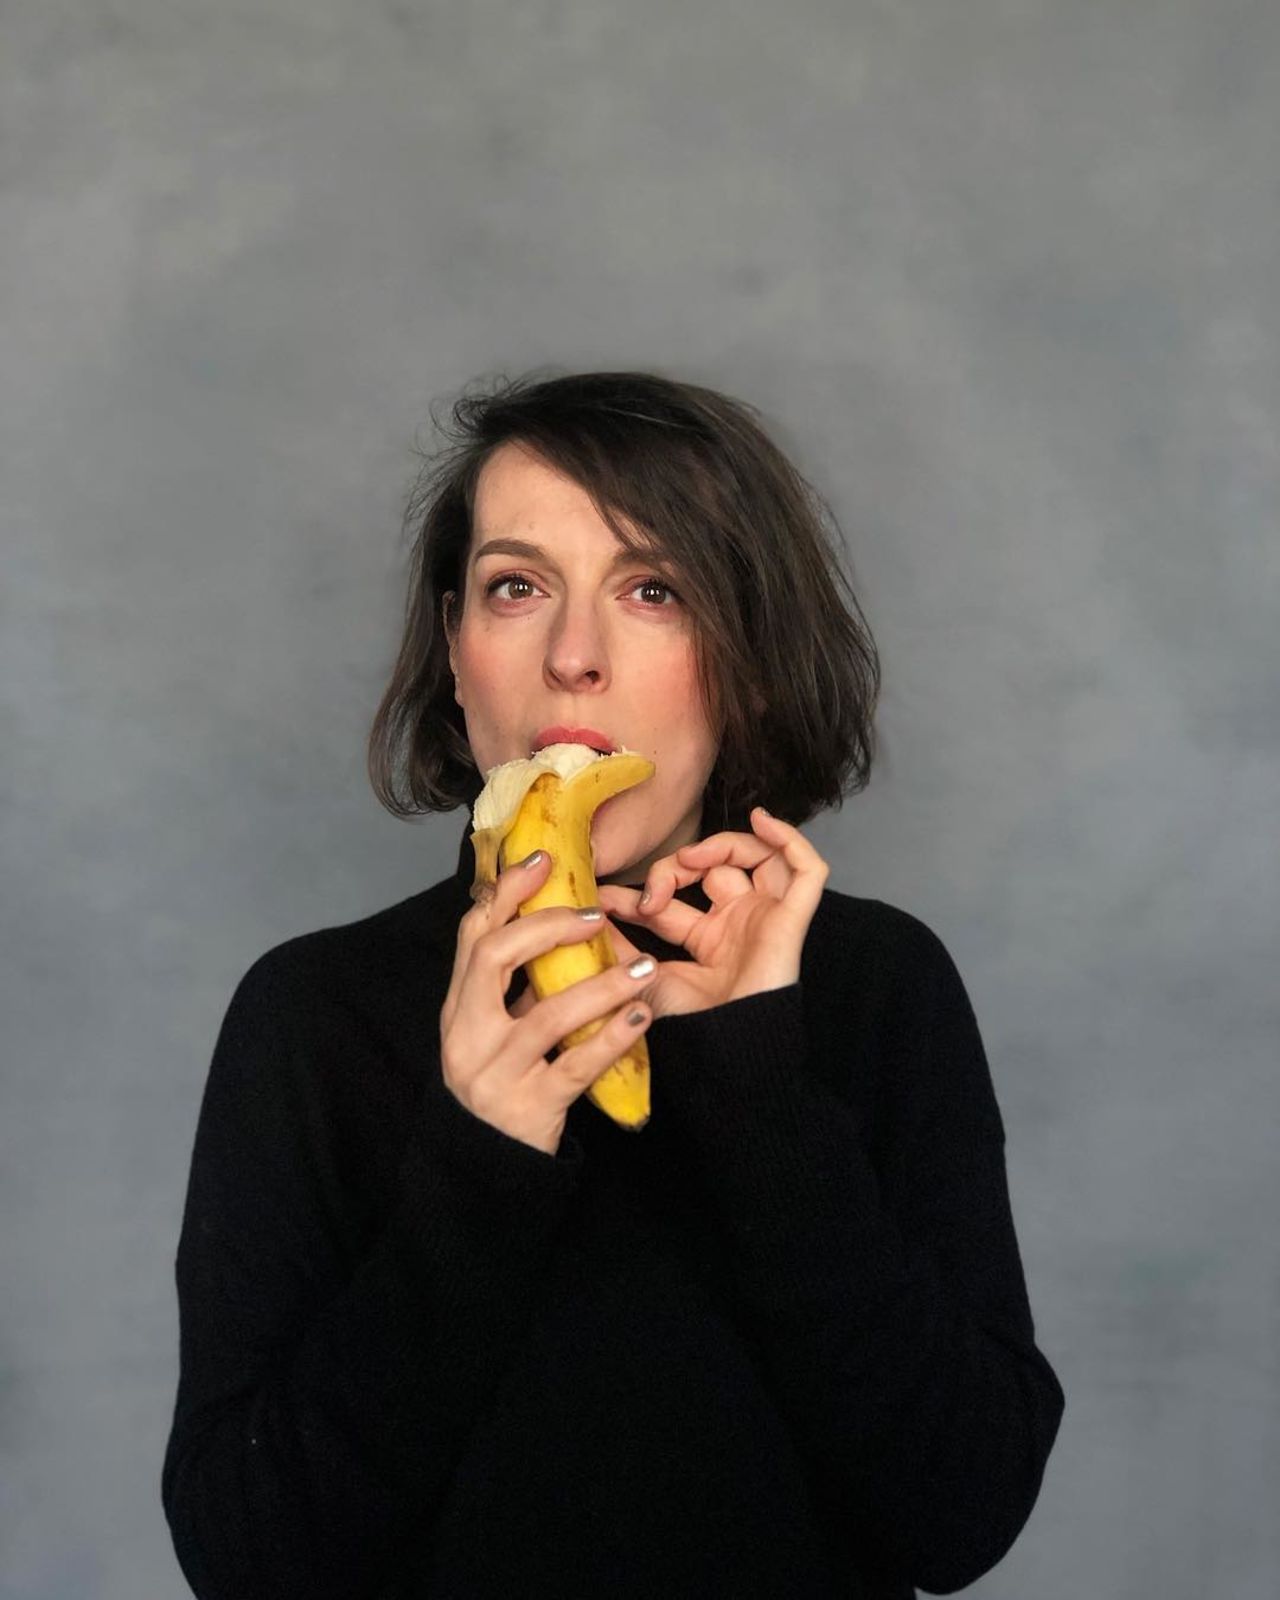 Sylwia Kowalczyk, a Polish photographer now based in Scotland, posted a photo of herself on Instagram eating a banana in protest against the museum's decision. 